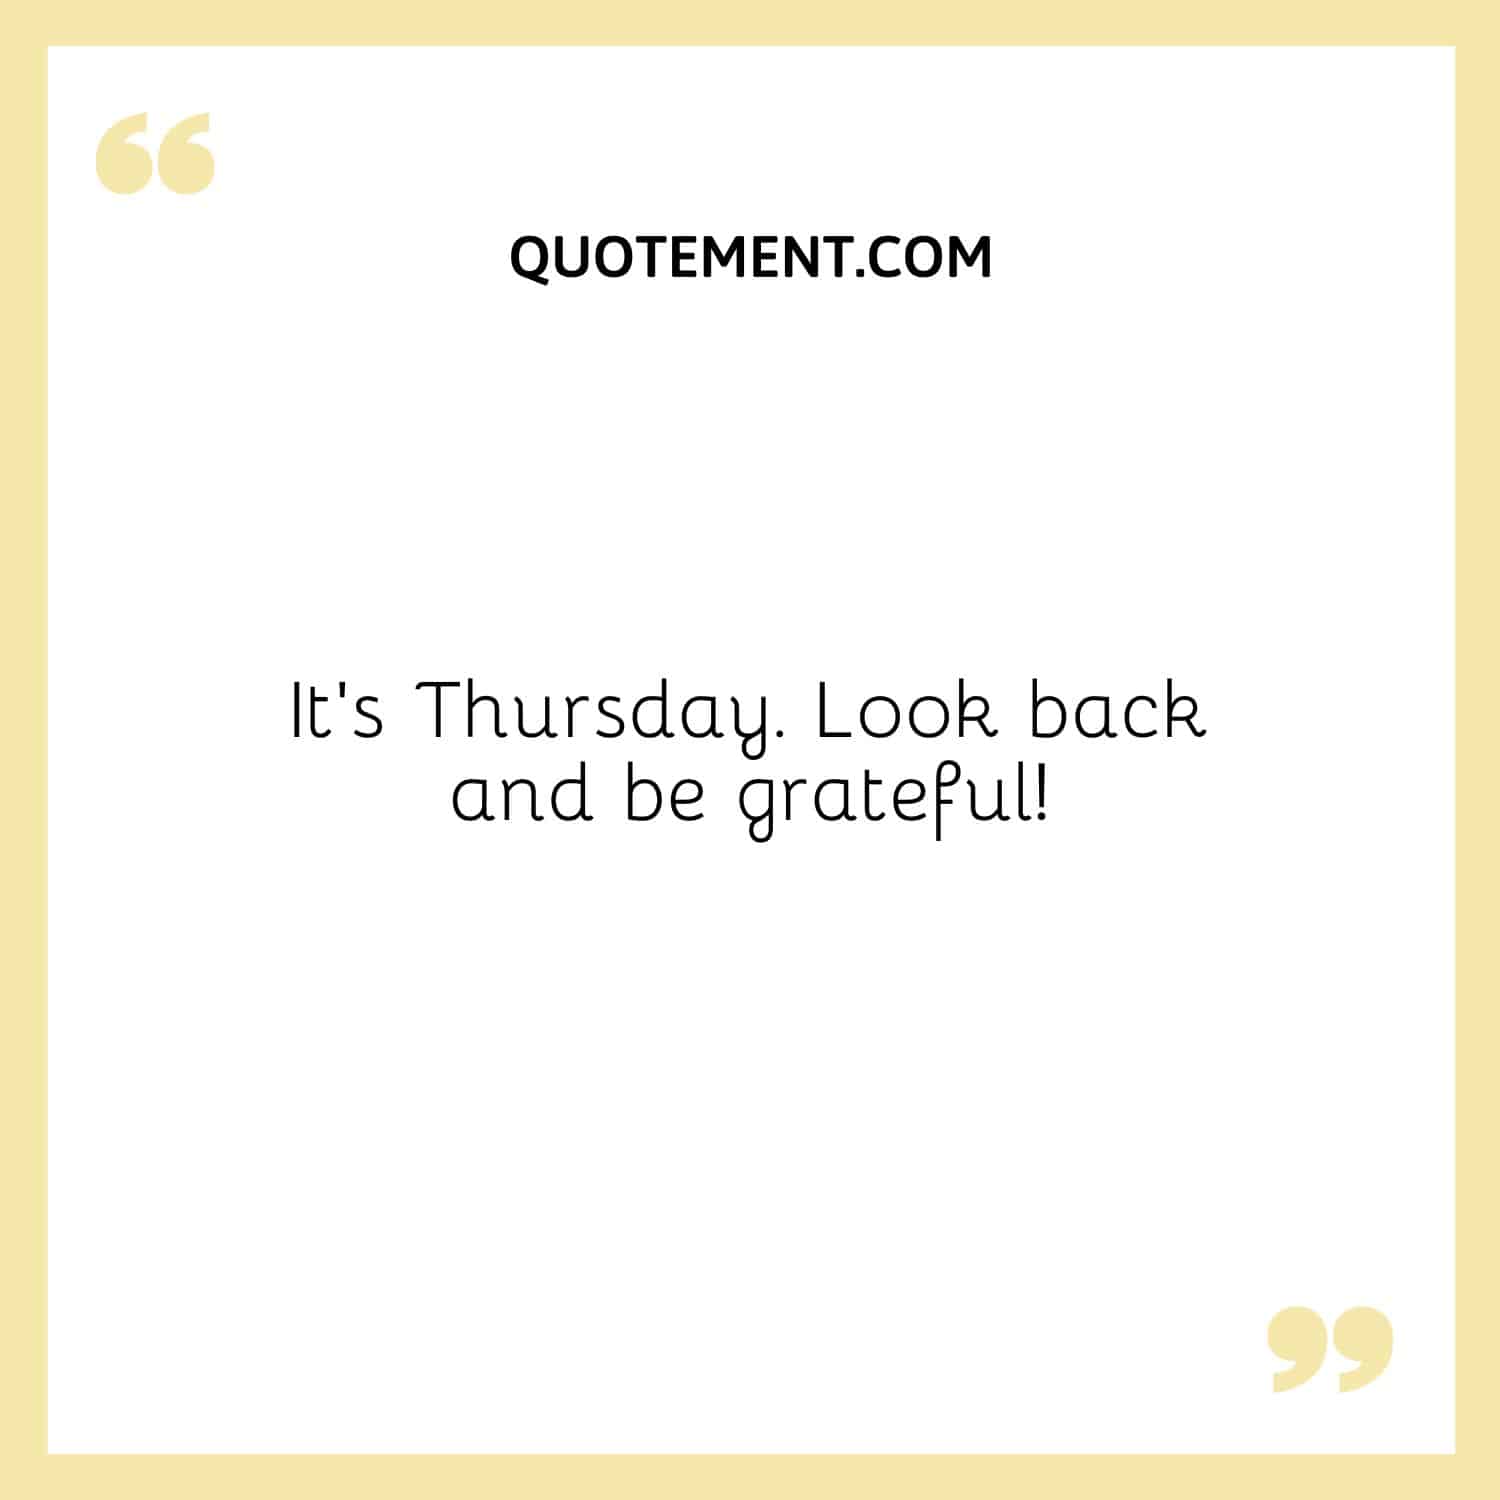 It’s Thursday. Look back and be grateful